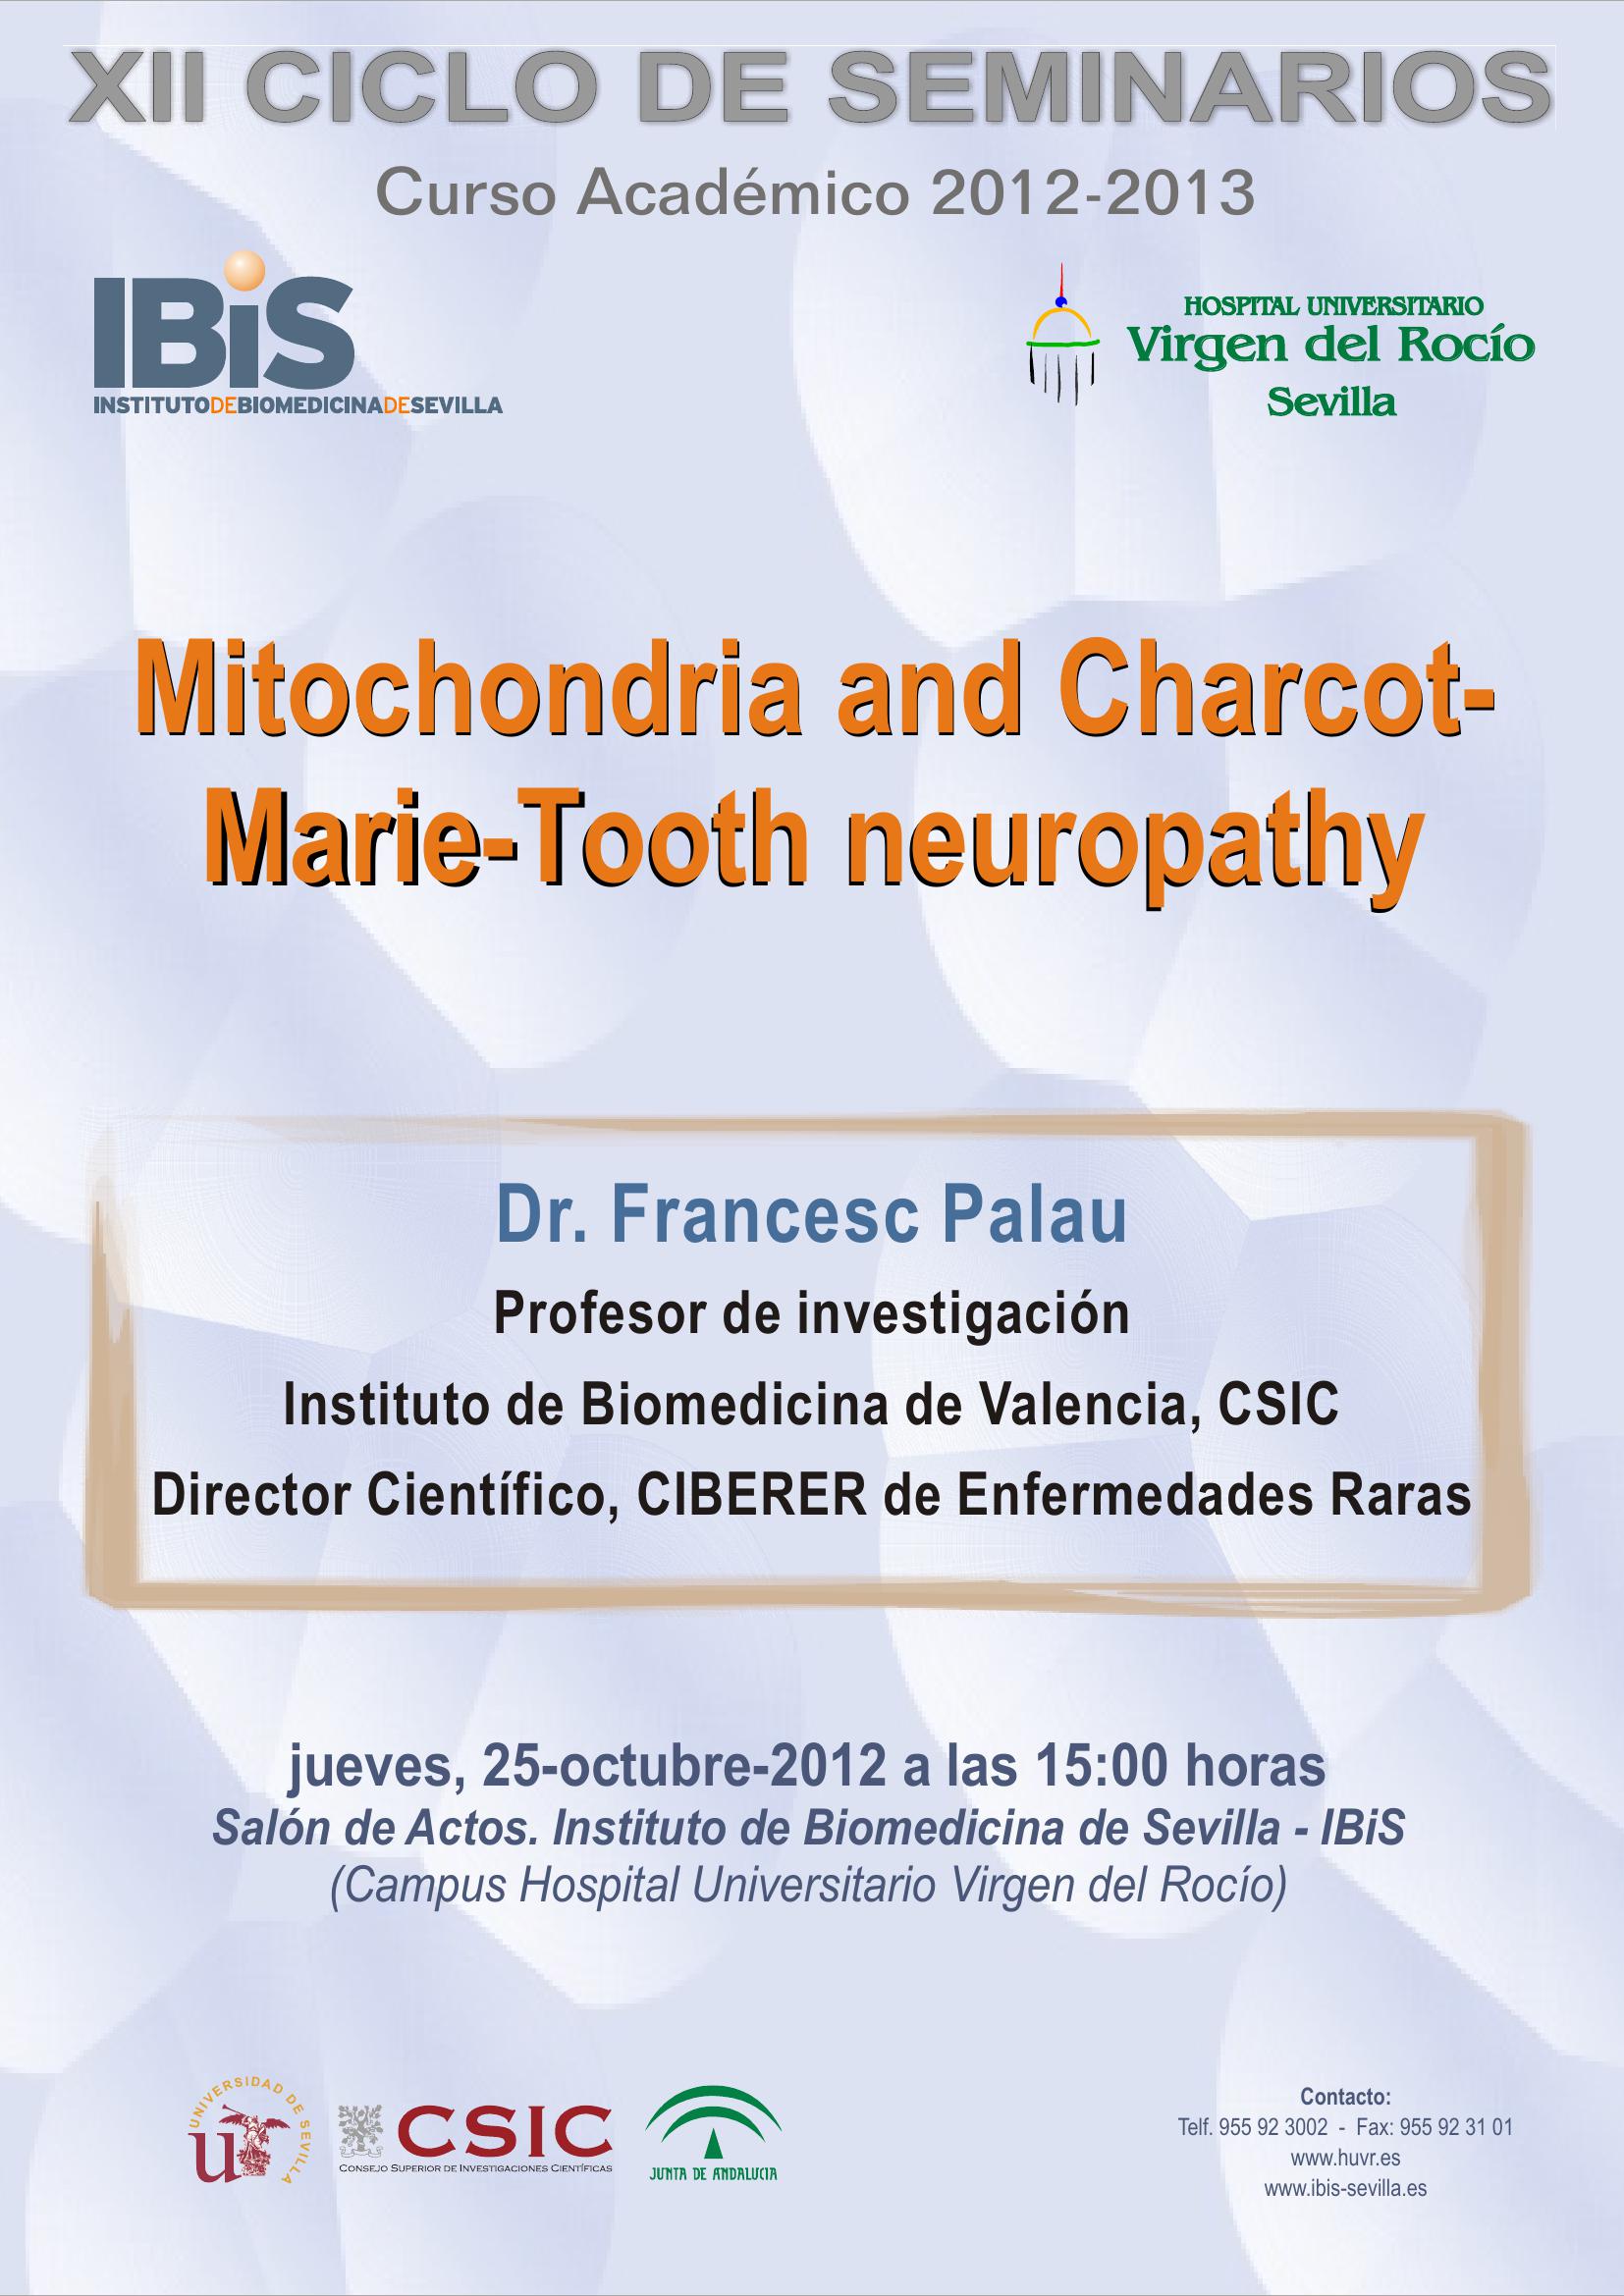 Poster: Mitochondria and Charcot-Marie-Tooth neuropathy.